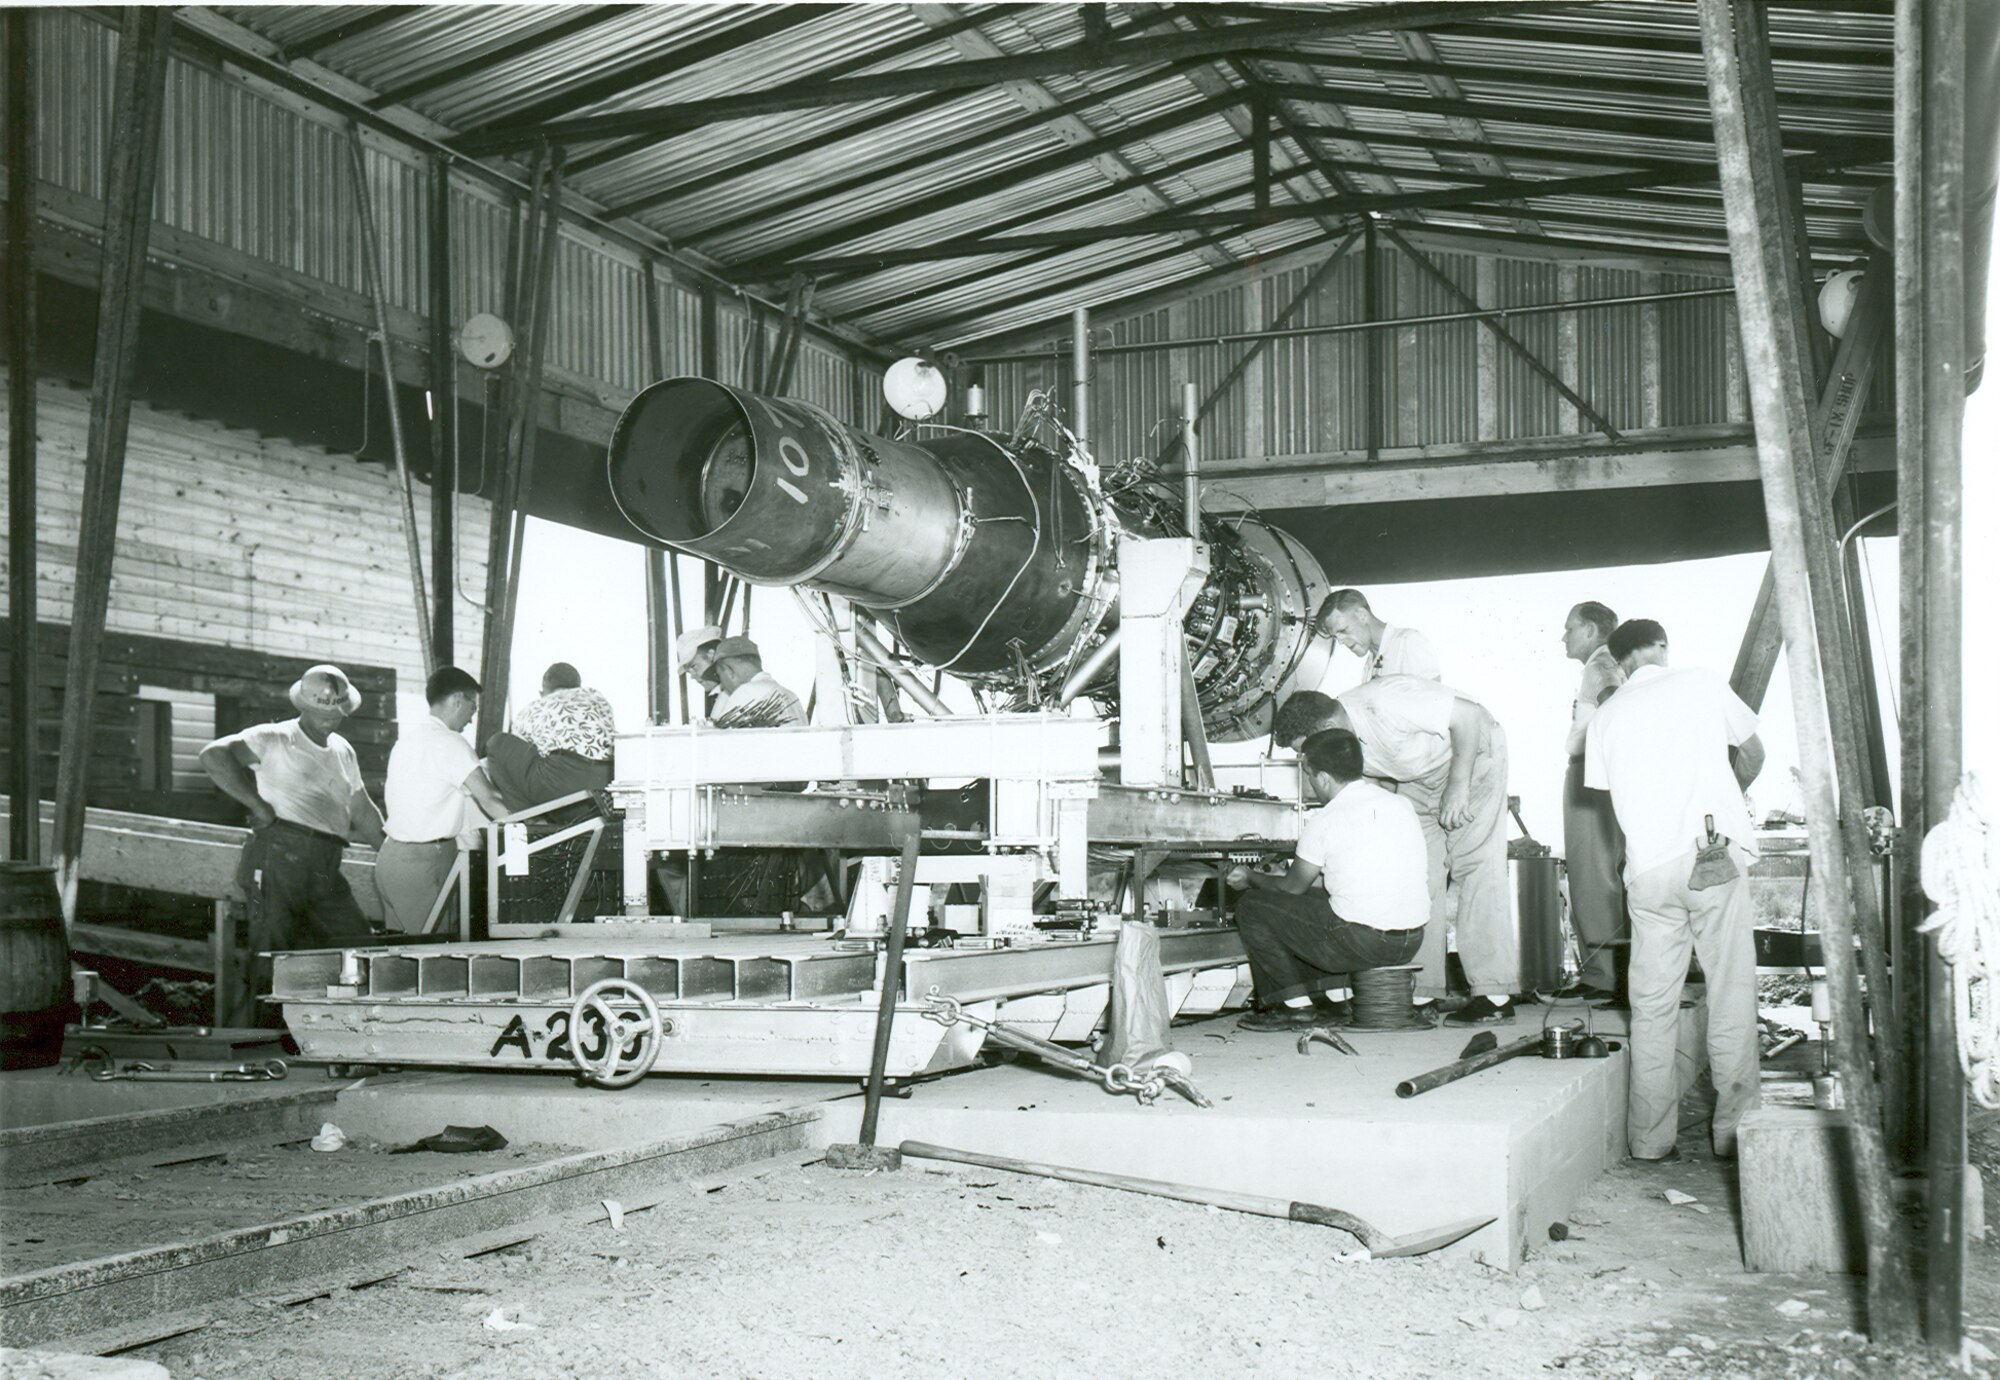 The first jet engine test pictured here at the AEDC Engine Test Facility took place in 1953. The test required design and construction of a thrust stand for the J47 turbojet engine used in calibrating the Complex T-1 high-altitude test cell. (AEDC file photo)